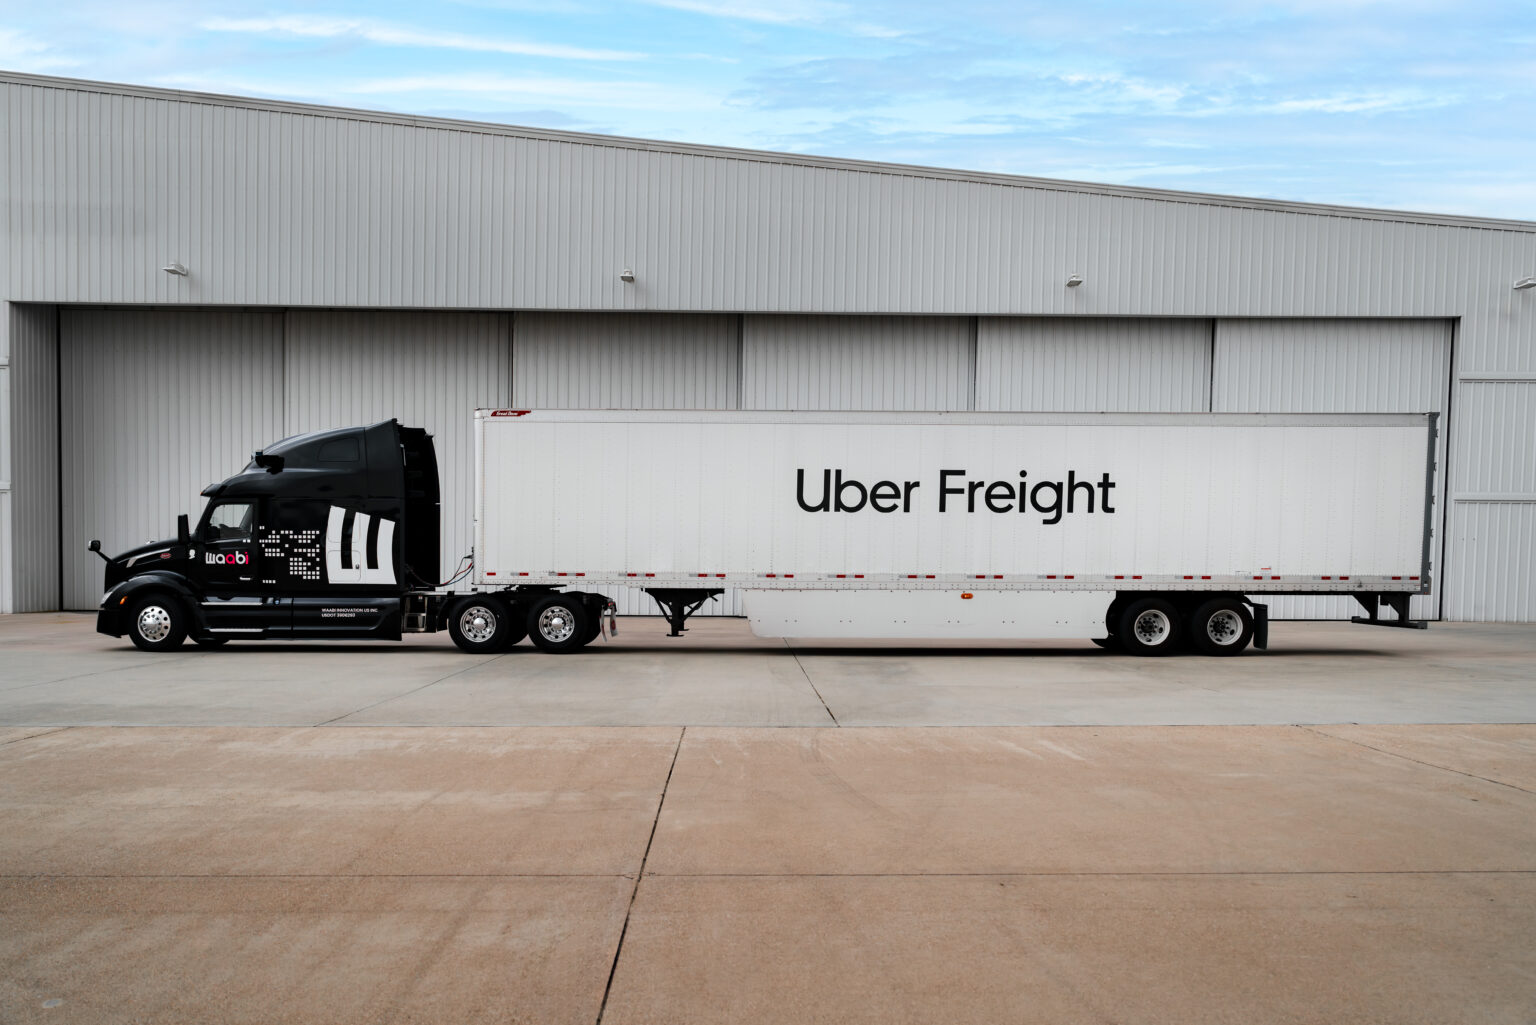 The agreement pairs Waabi’s core technology with Uber Freight’s vast logistics platform to deliver a turnkey driver-as-a-service solution that will be the first of its kind